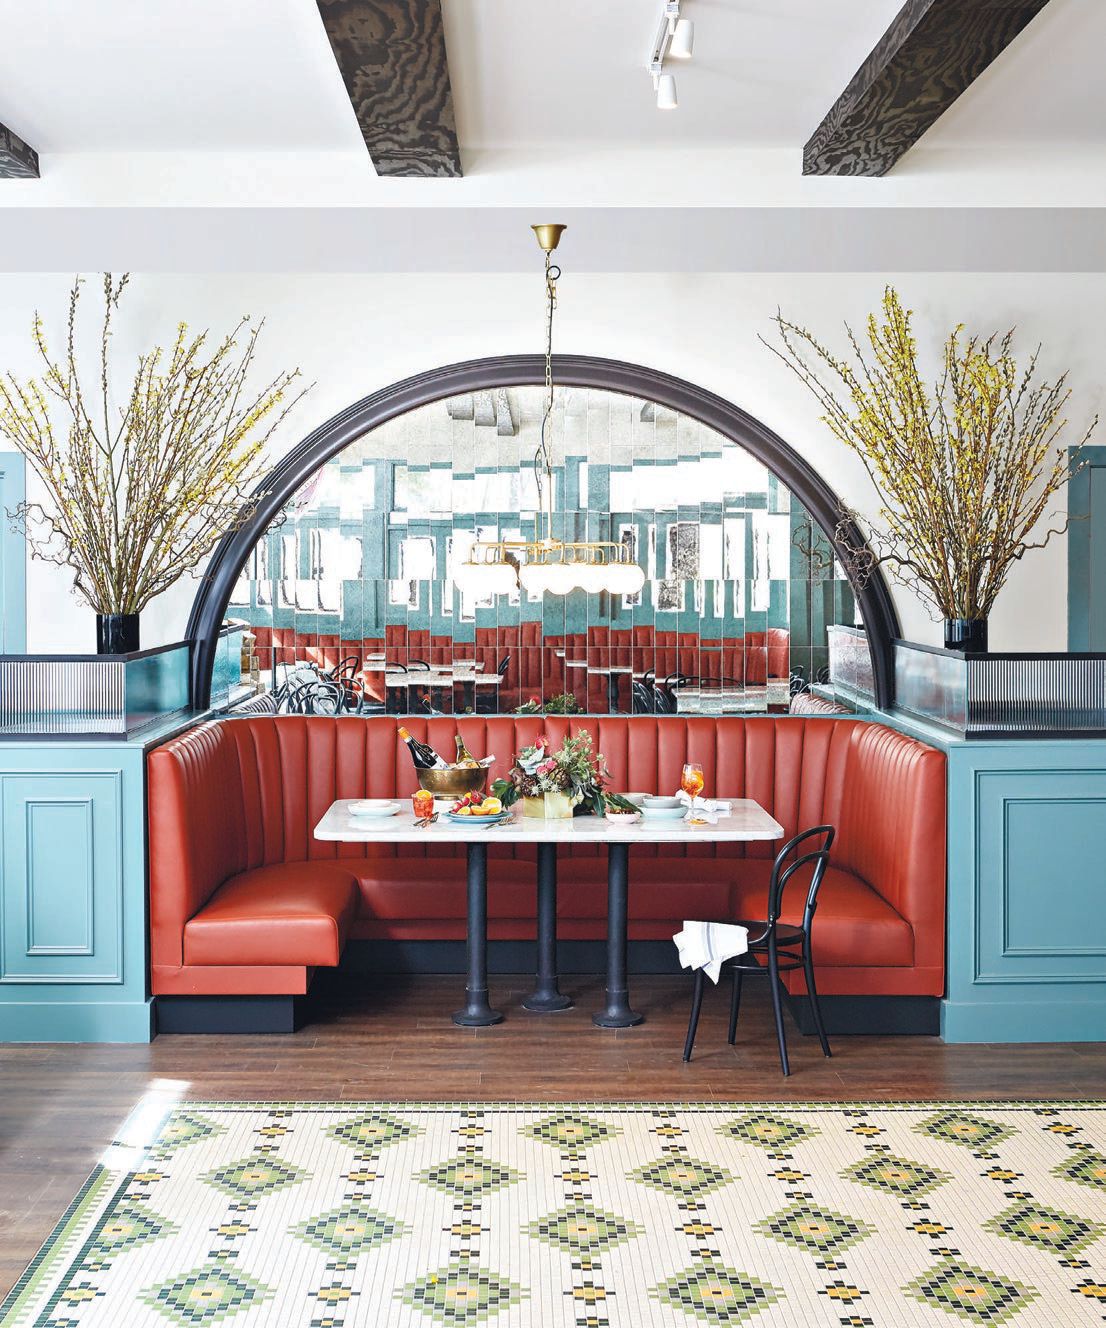 Beverley’s offers the ultimate ambiance for brunching in style. BEVERLEY’S PHOTO BY JILL BROUSSARD